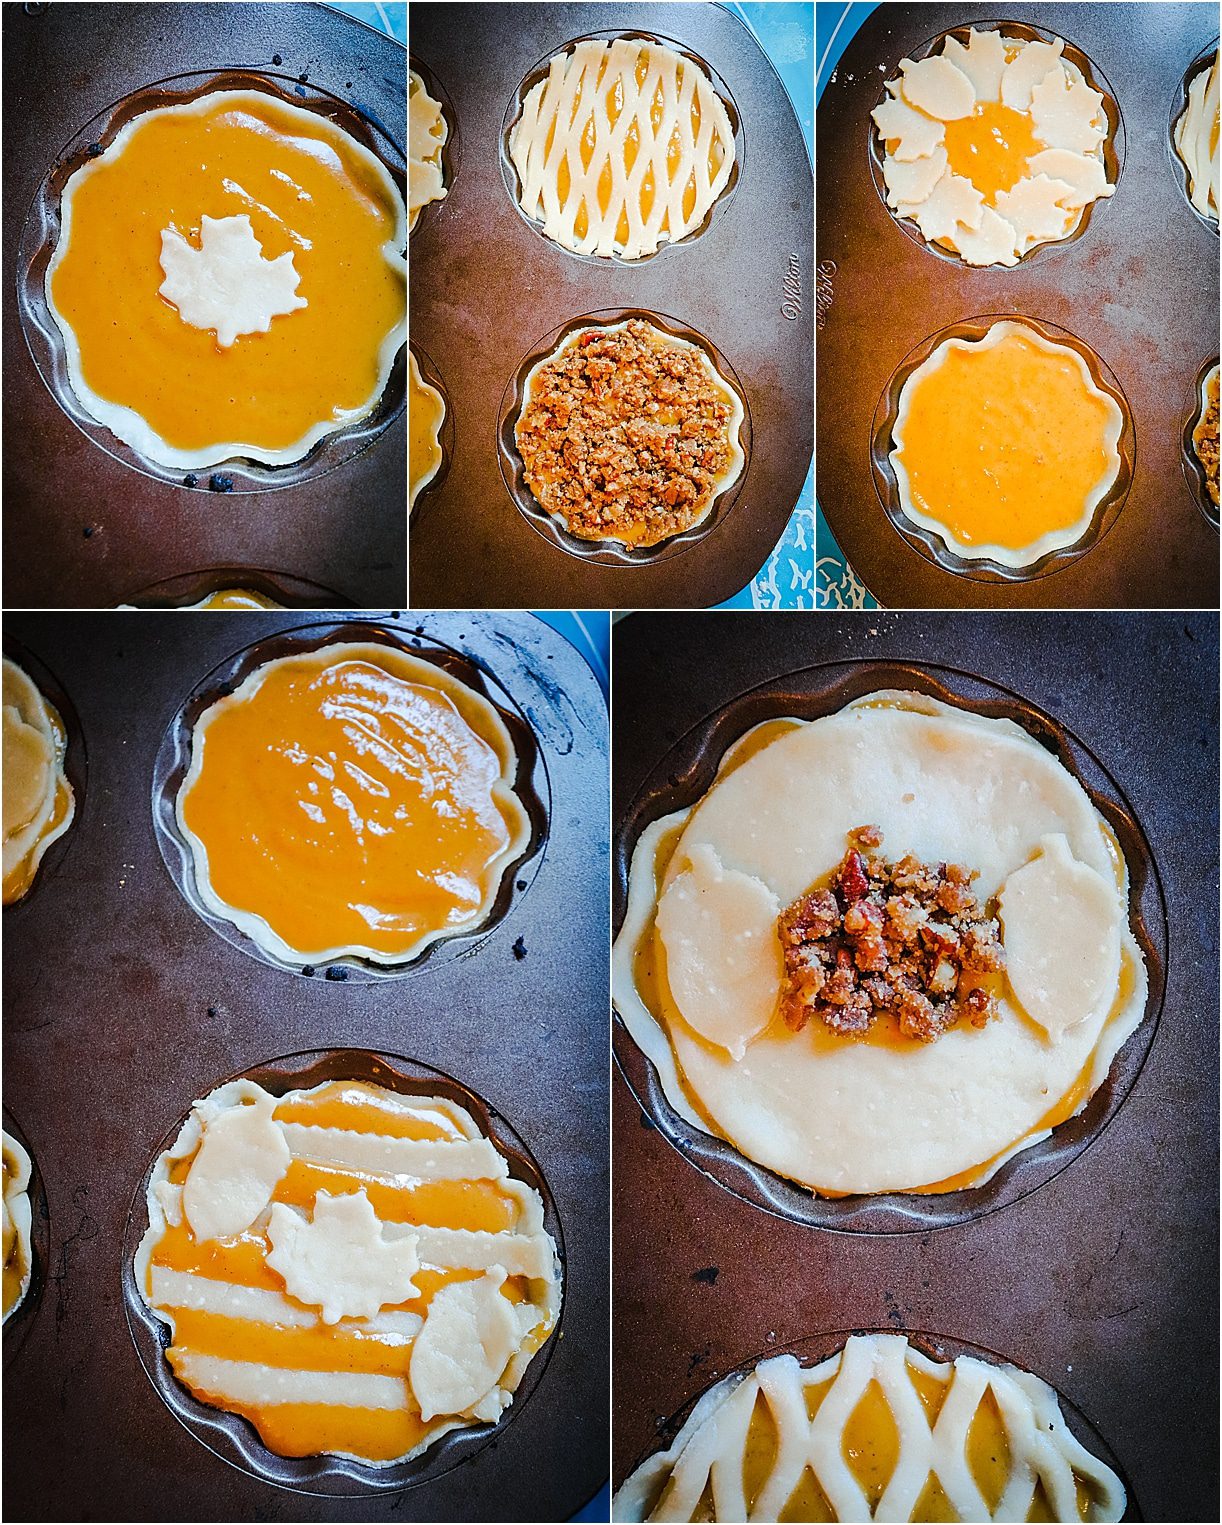 Decorating Pie Tops with Pastry